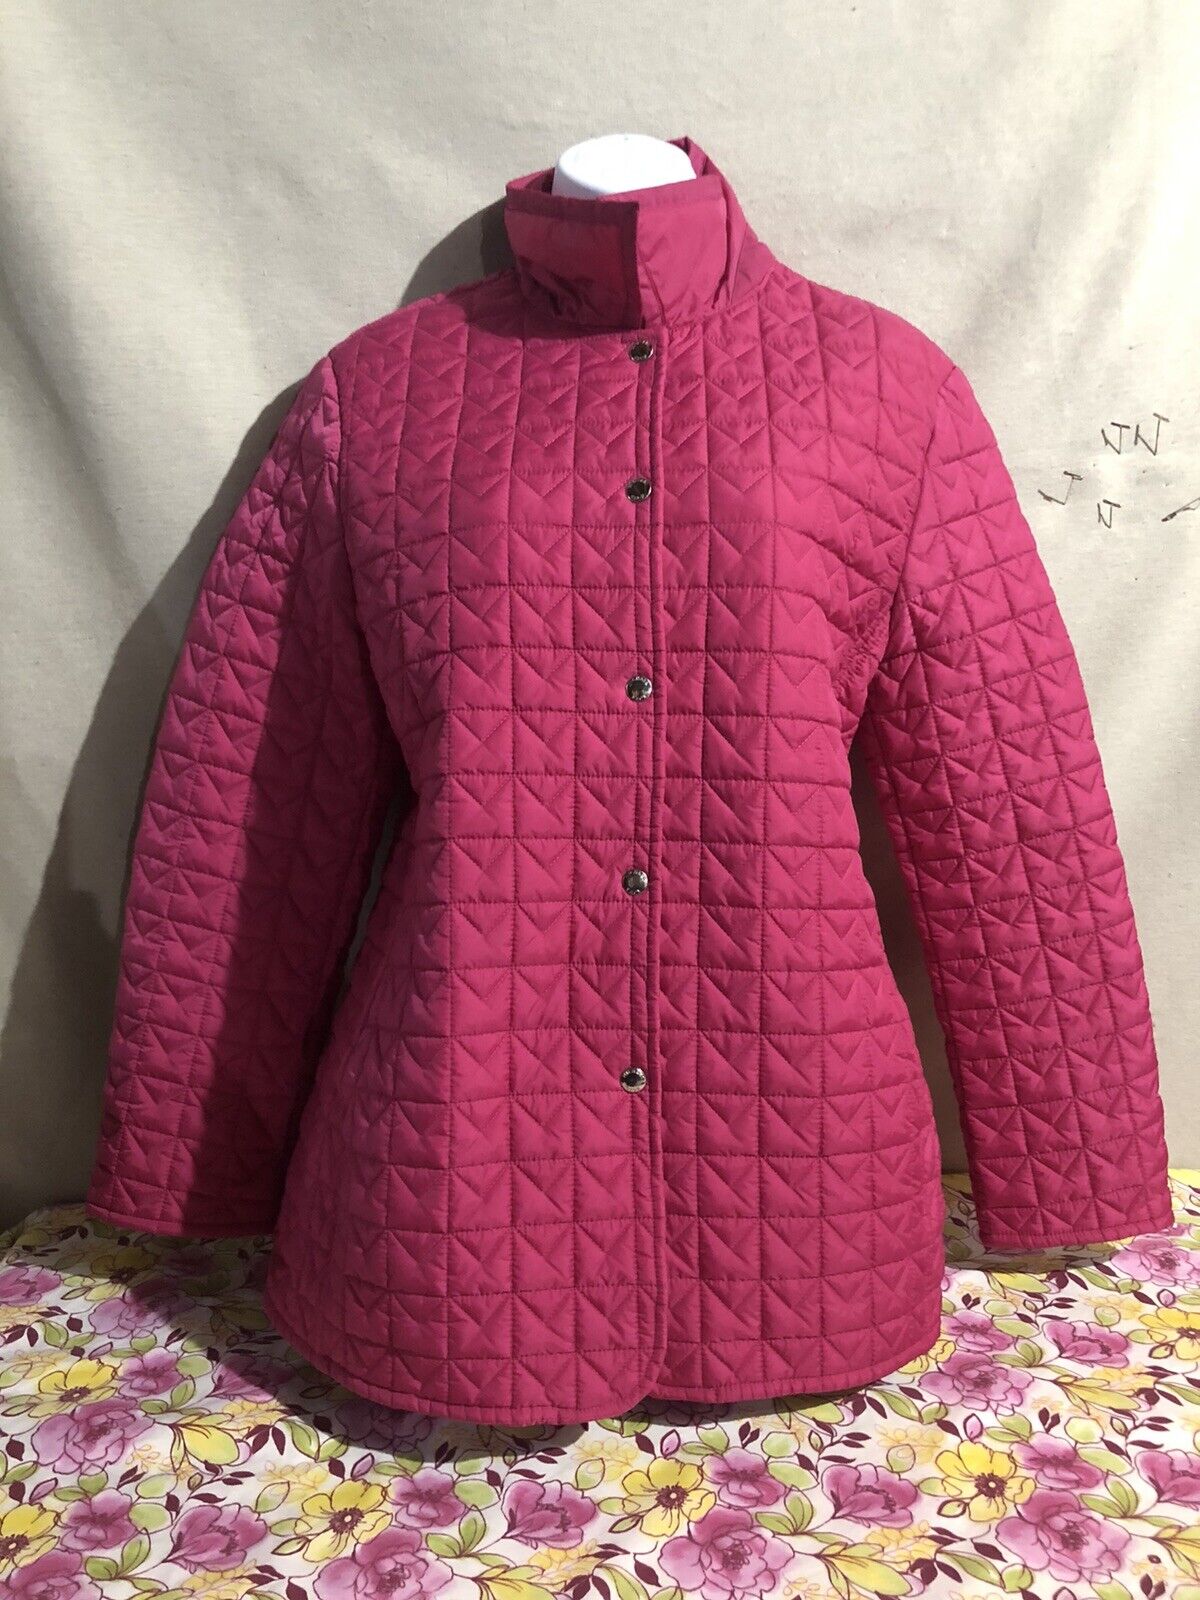 Michael Kors Quilted Jacket Pink - image 1